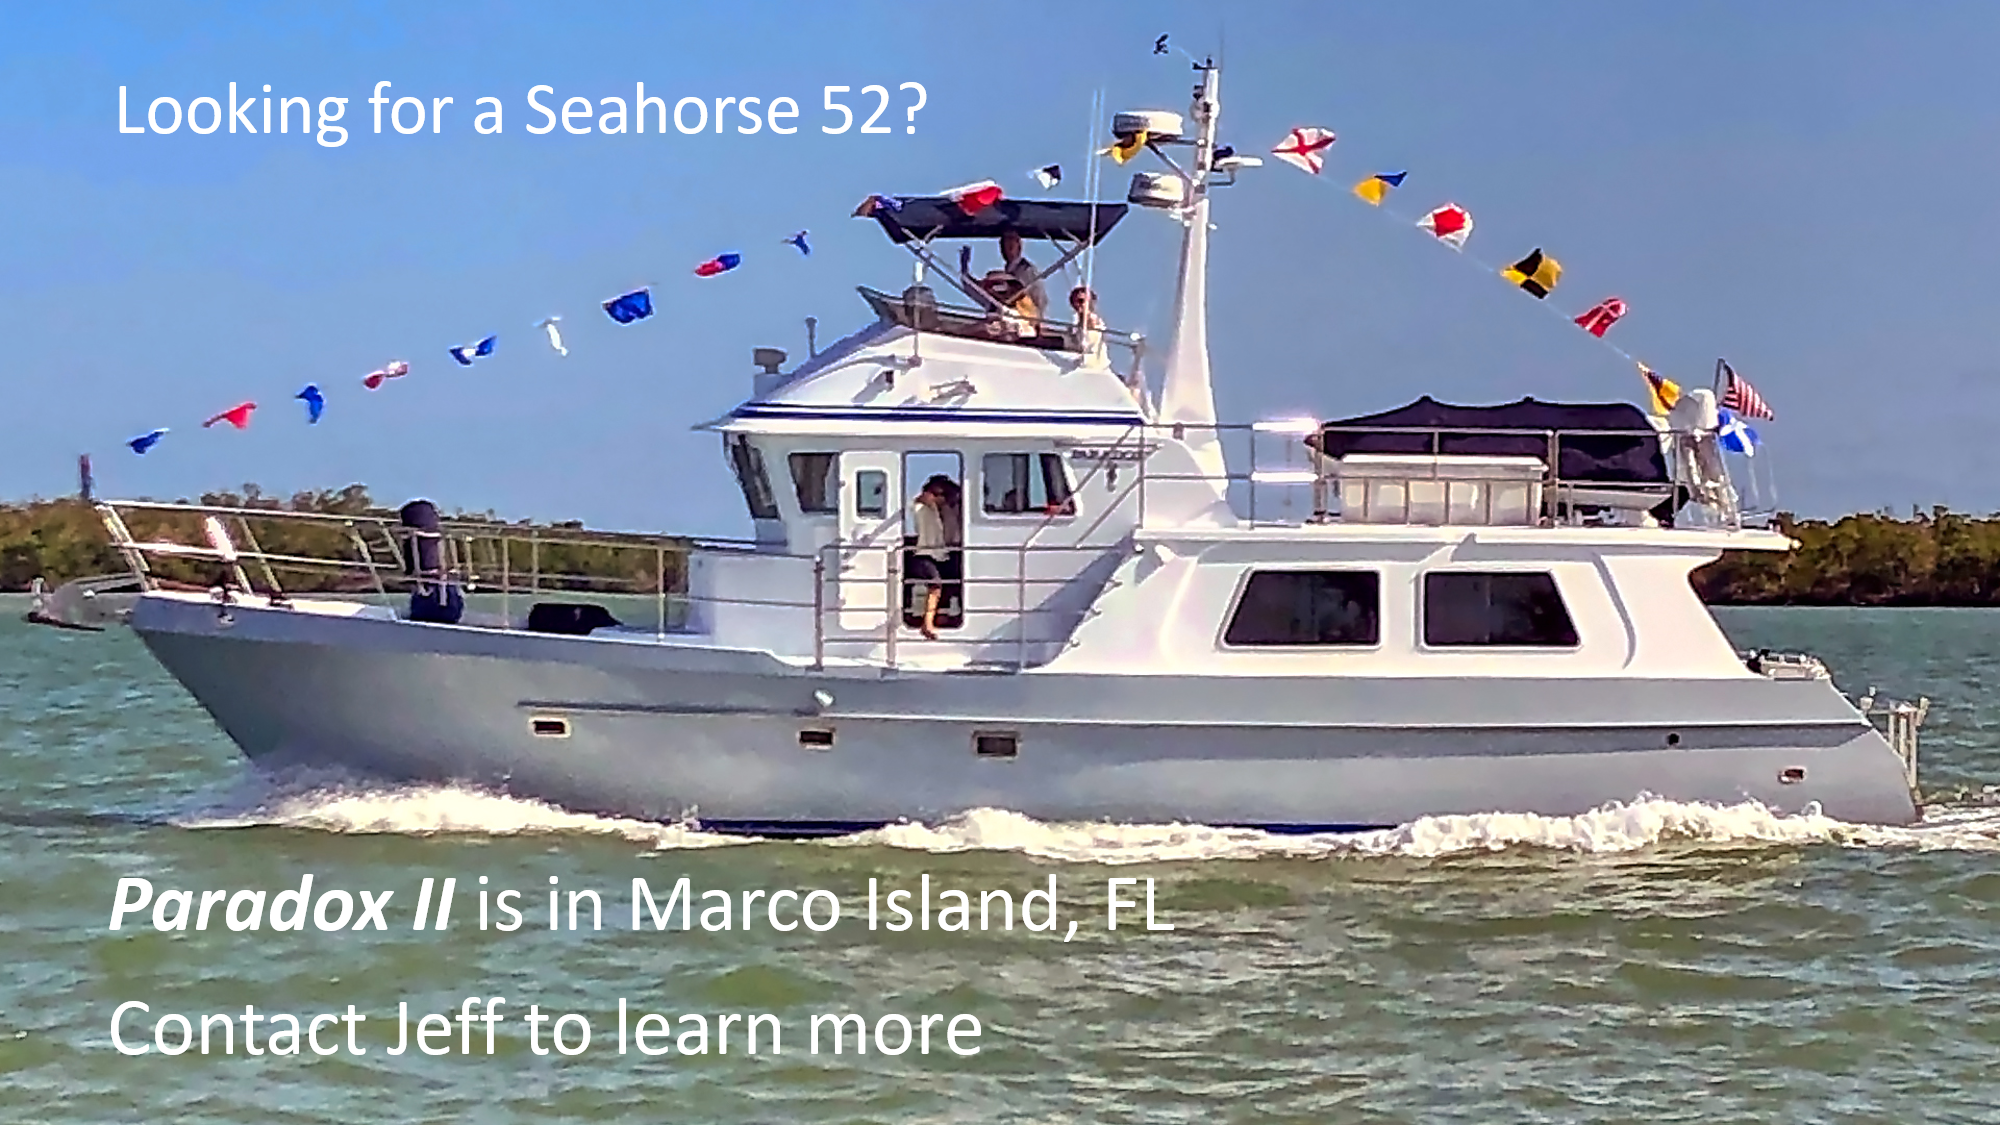 Looking for a Seahorse 52?